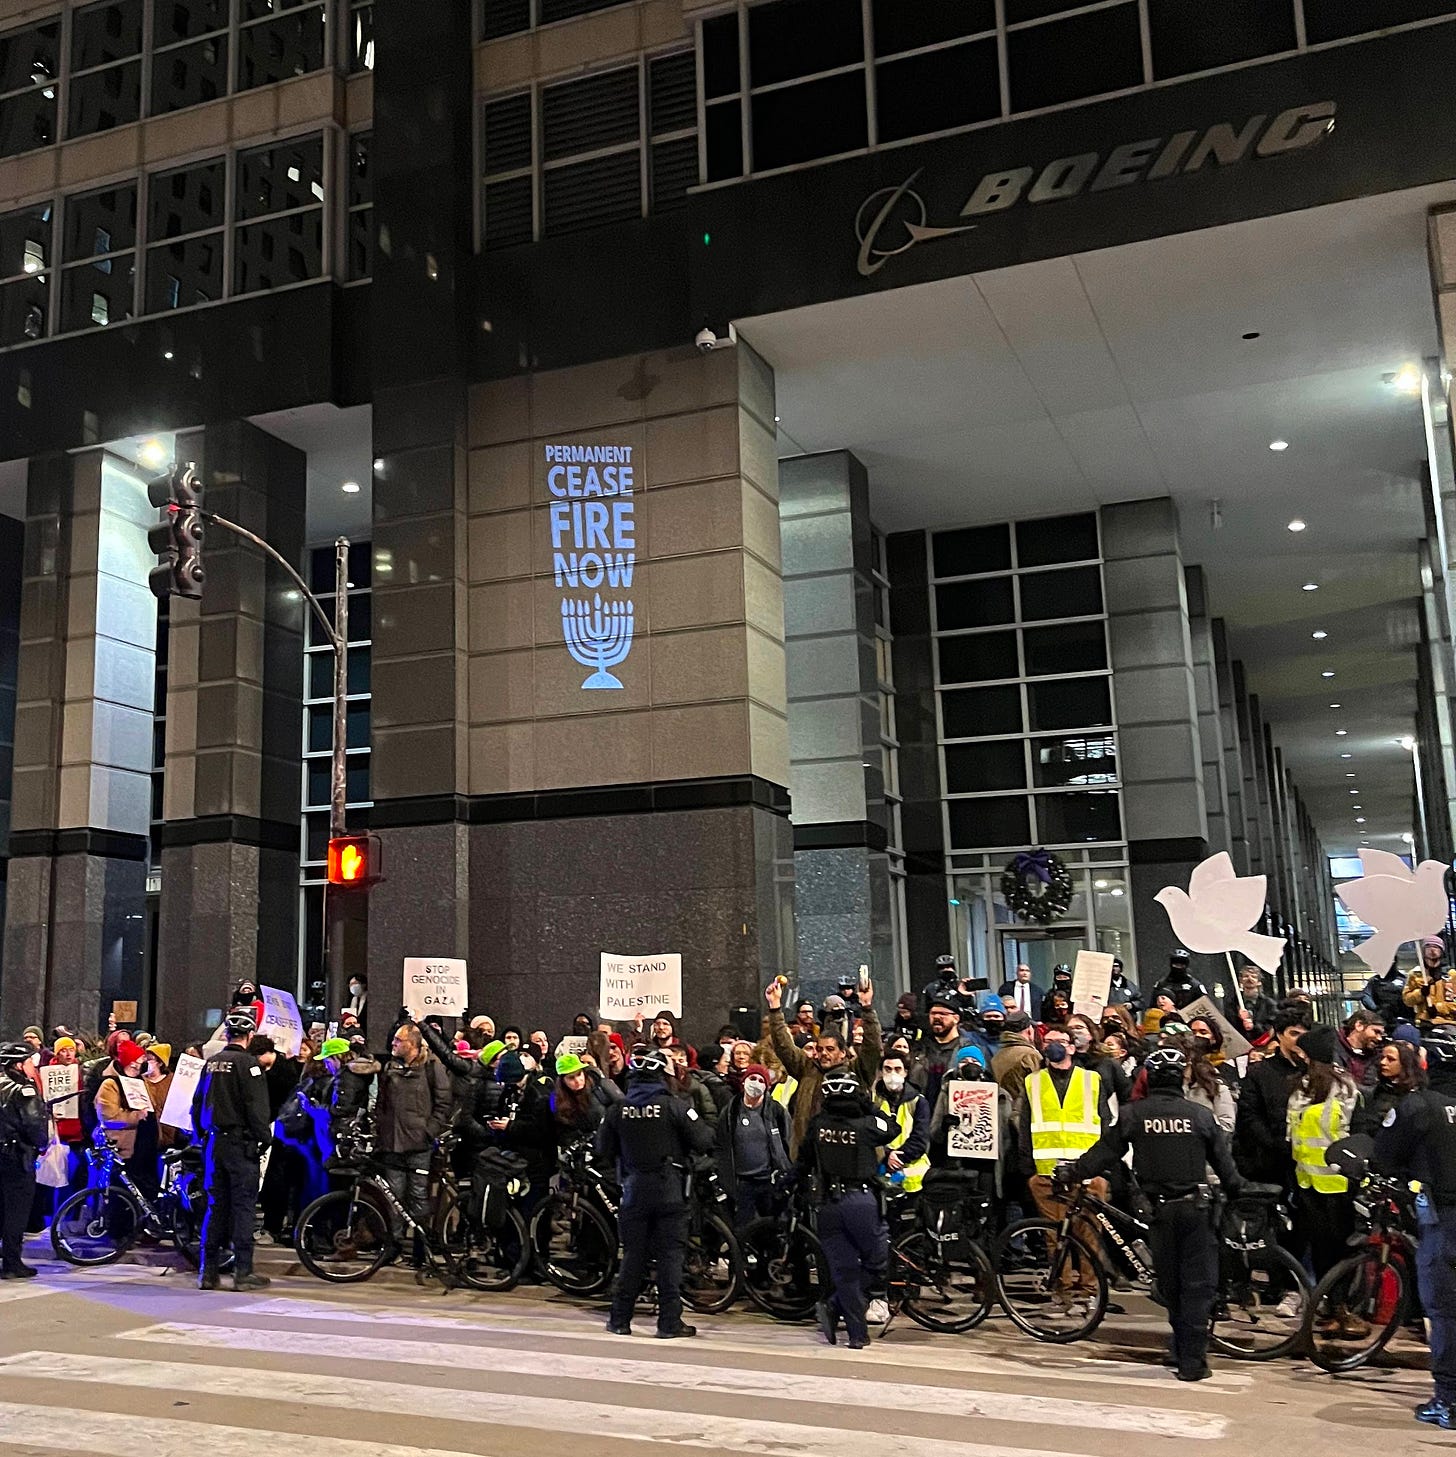 A message that reads "Permanent Ceasefire Now" above an image of a menorah is projected on the Boeing building in Chicago. There are hundreds of protesters in Chicago and a line of police blocking them from entering the street.